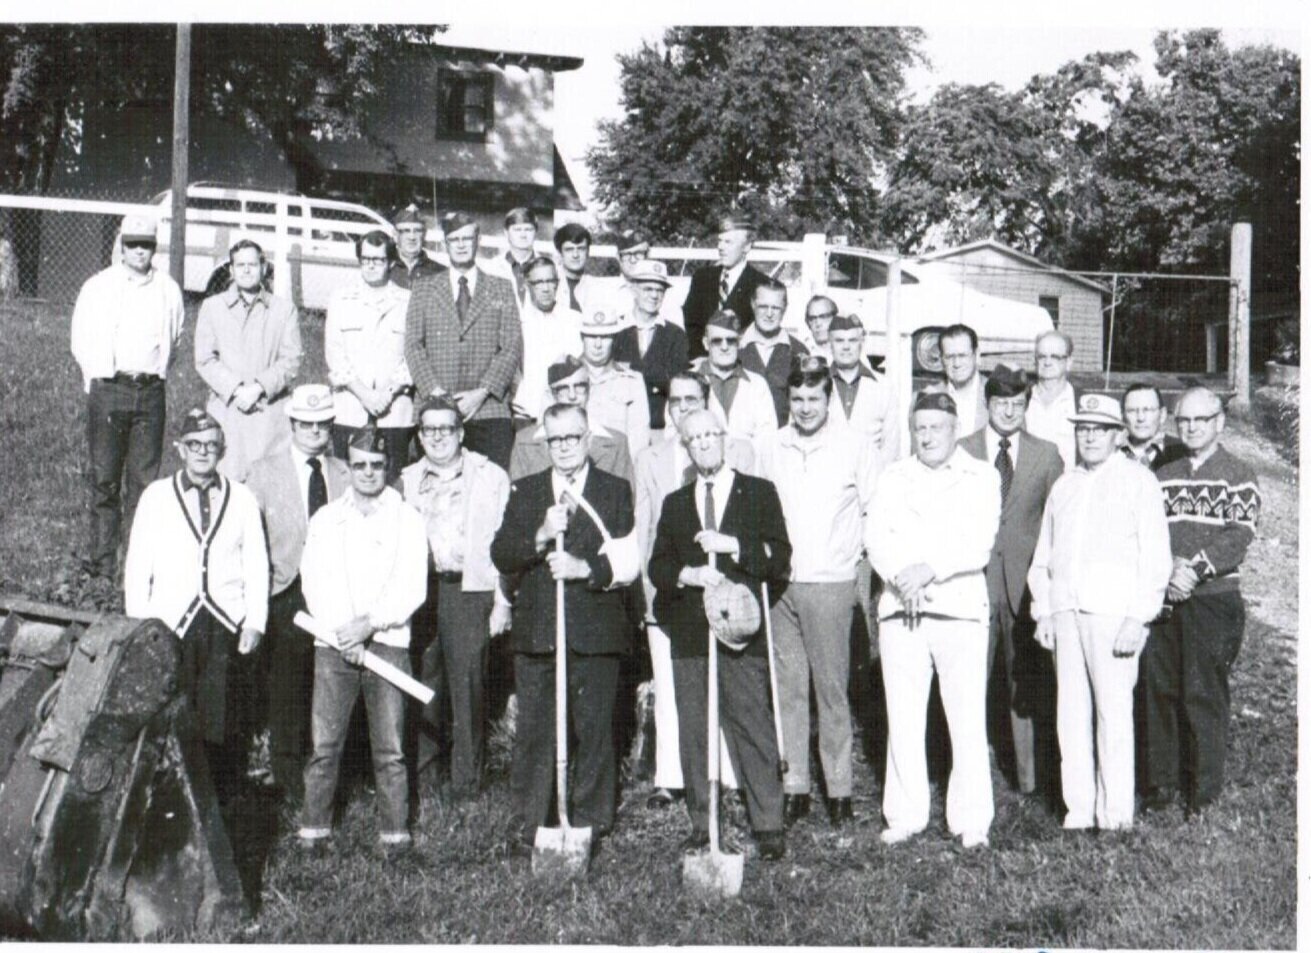  September 20, 1975 - Groundbreaking on what is now called the Zionsville Lions Clubhouse located at 115 S. Elm Street. 